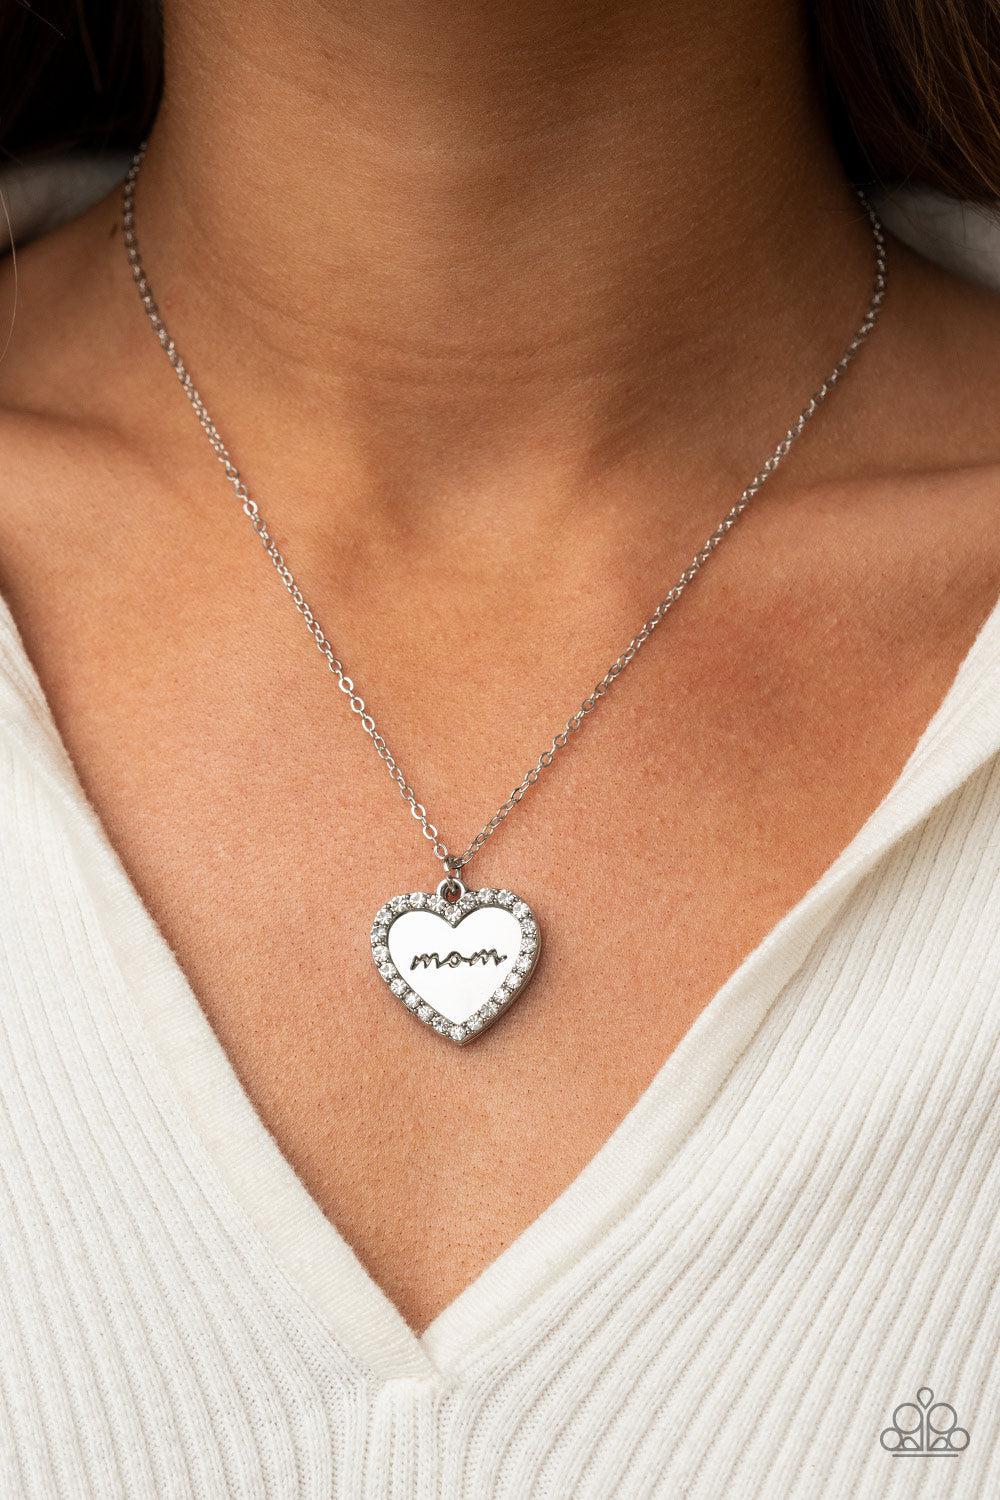 The Real Boss White Rhinestone Heart Necklace - Paparazzi Accessories-on model - CarasShop.com - $5 Jewelry by Cara Jewels